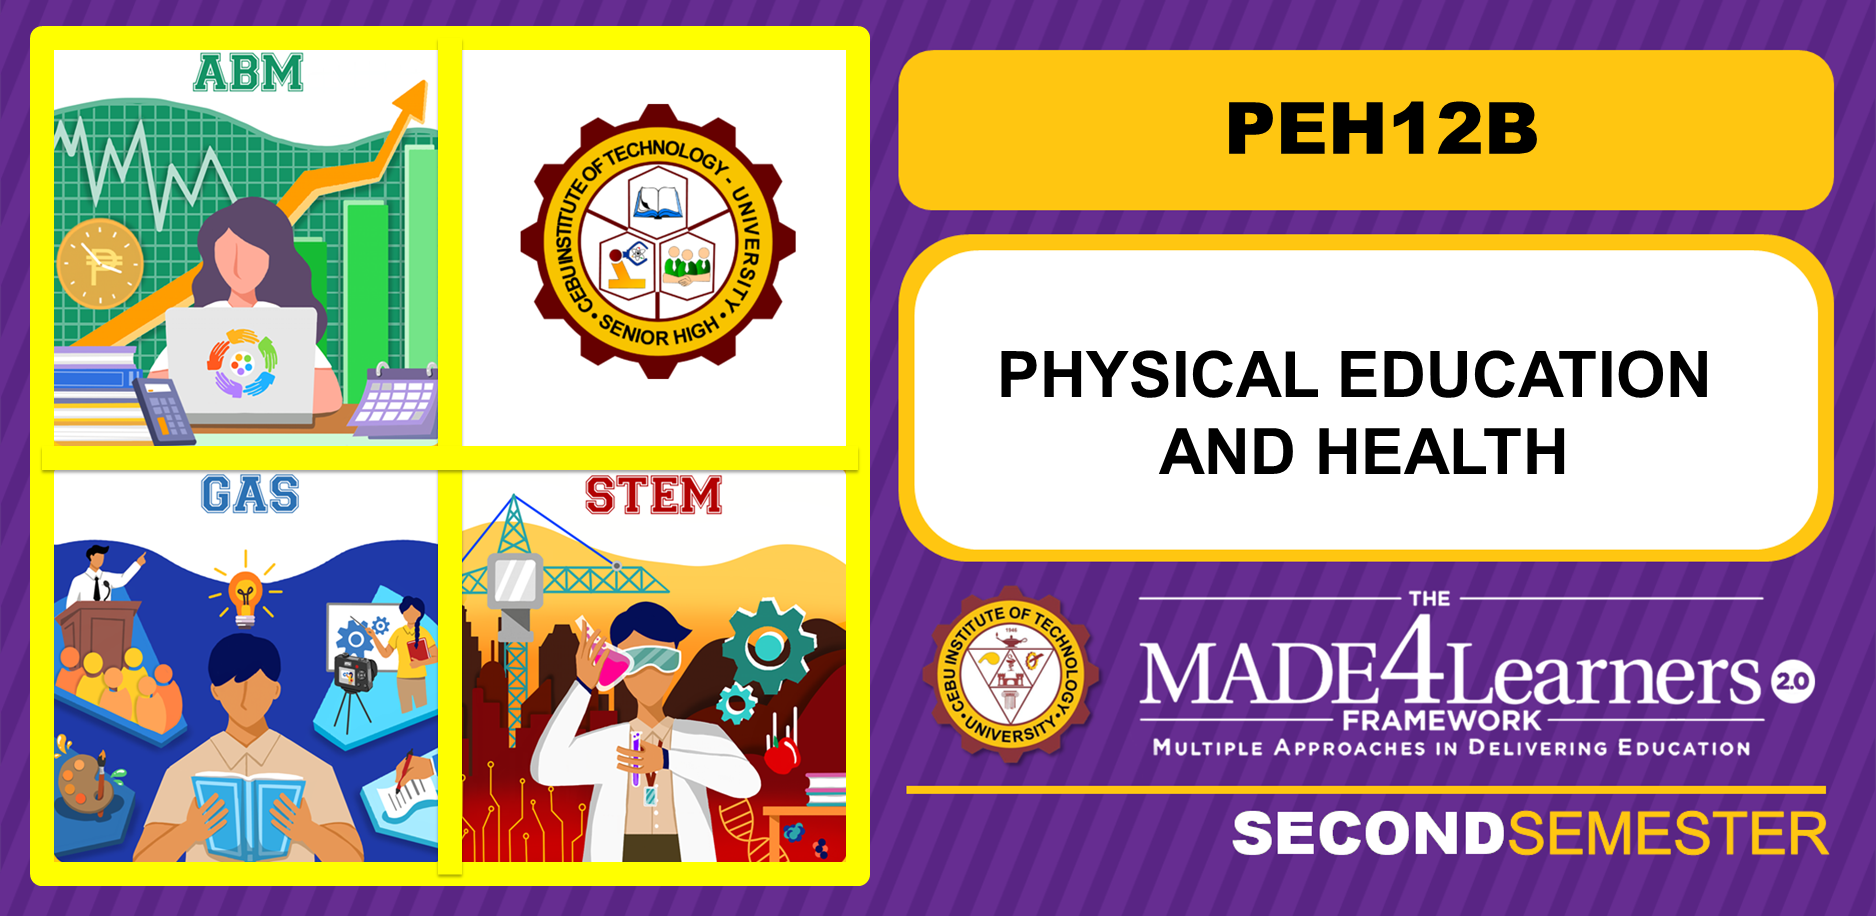 PEH12B: Physical Education and Health